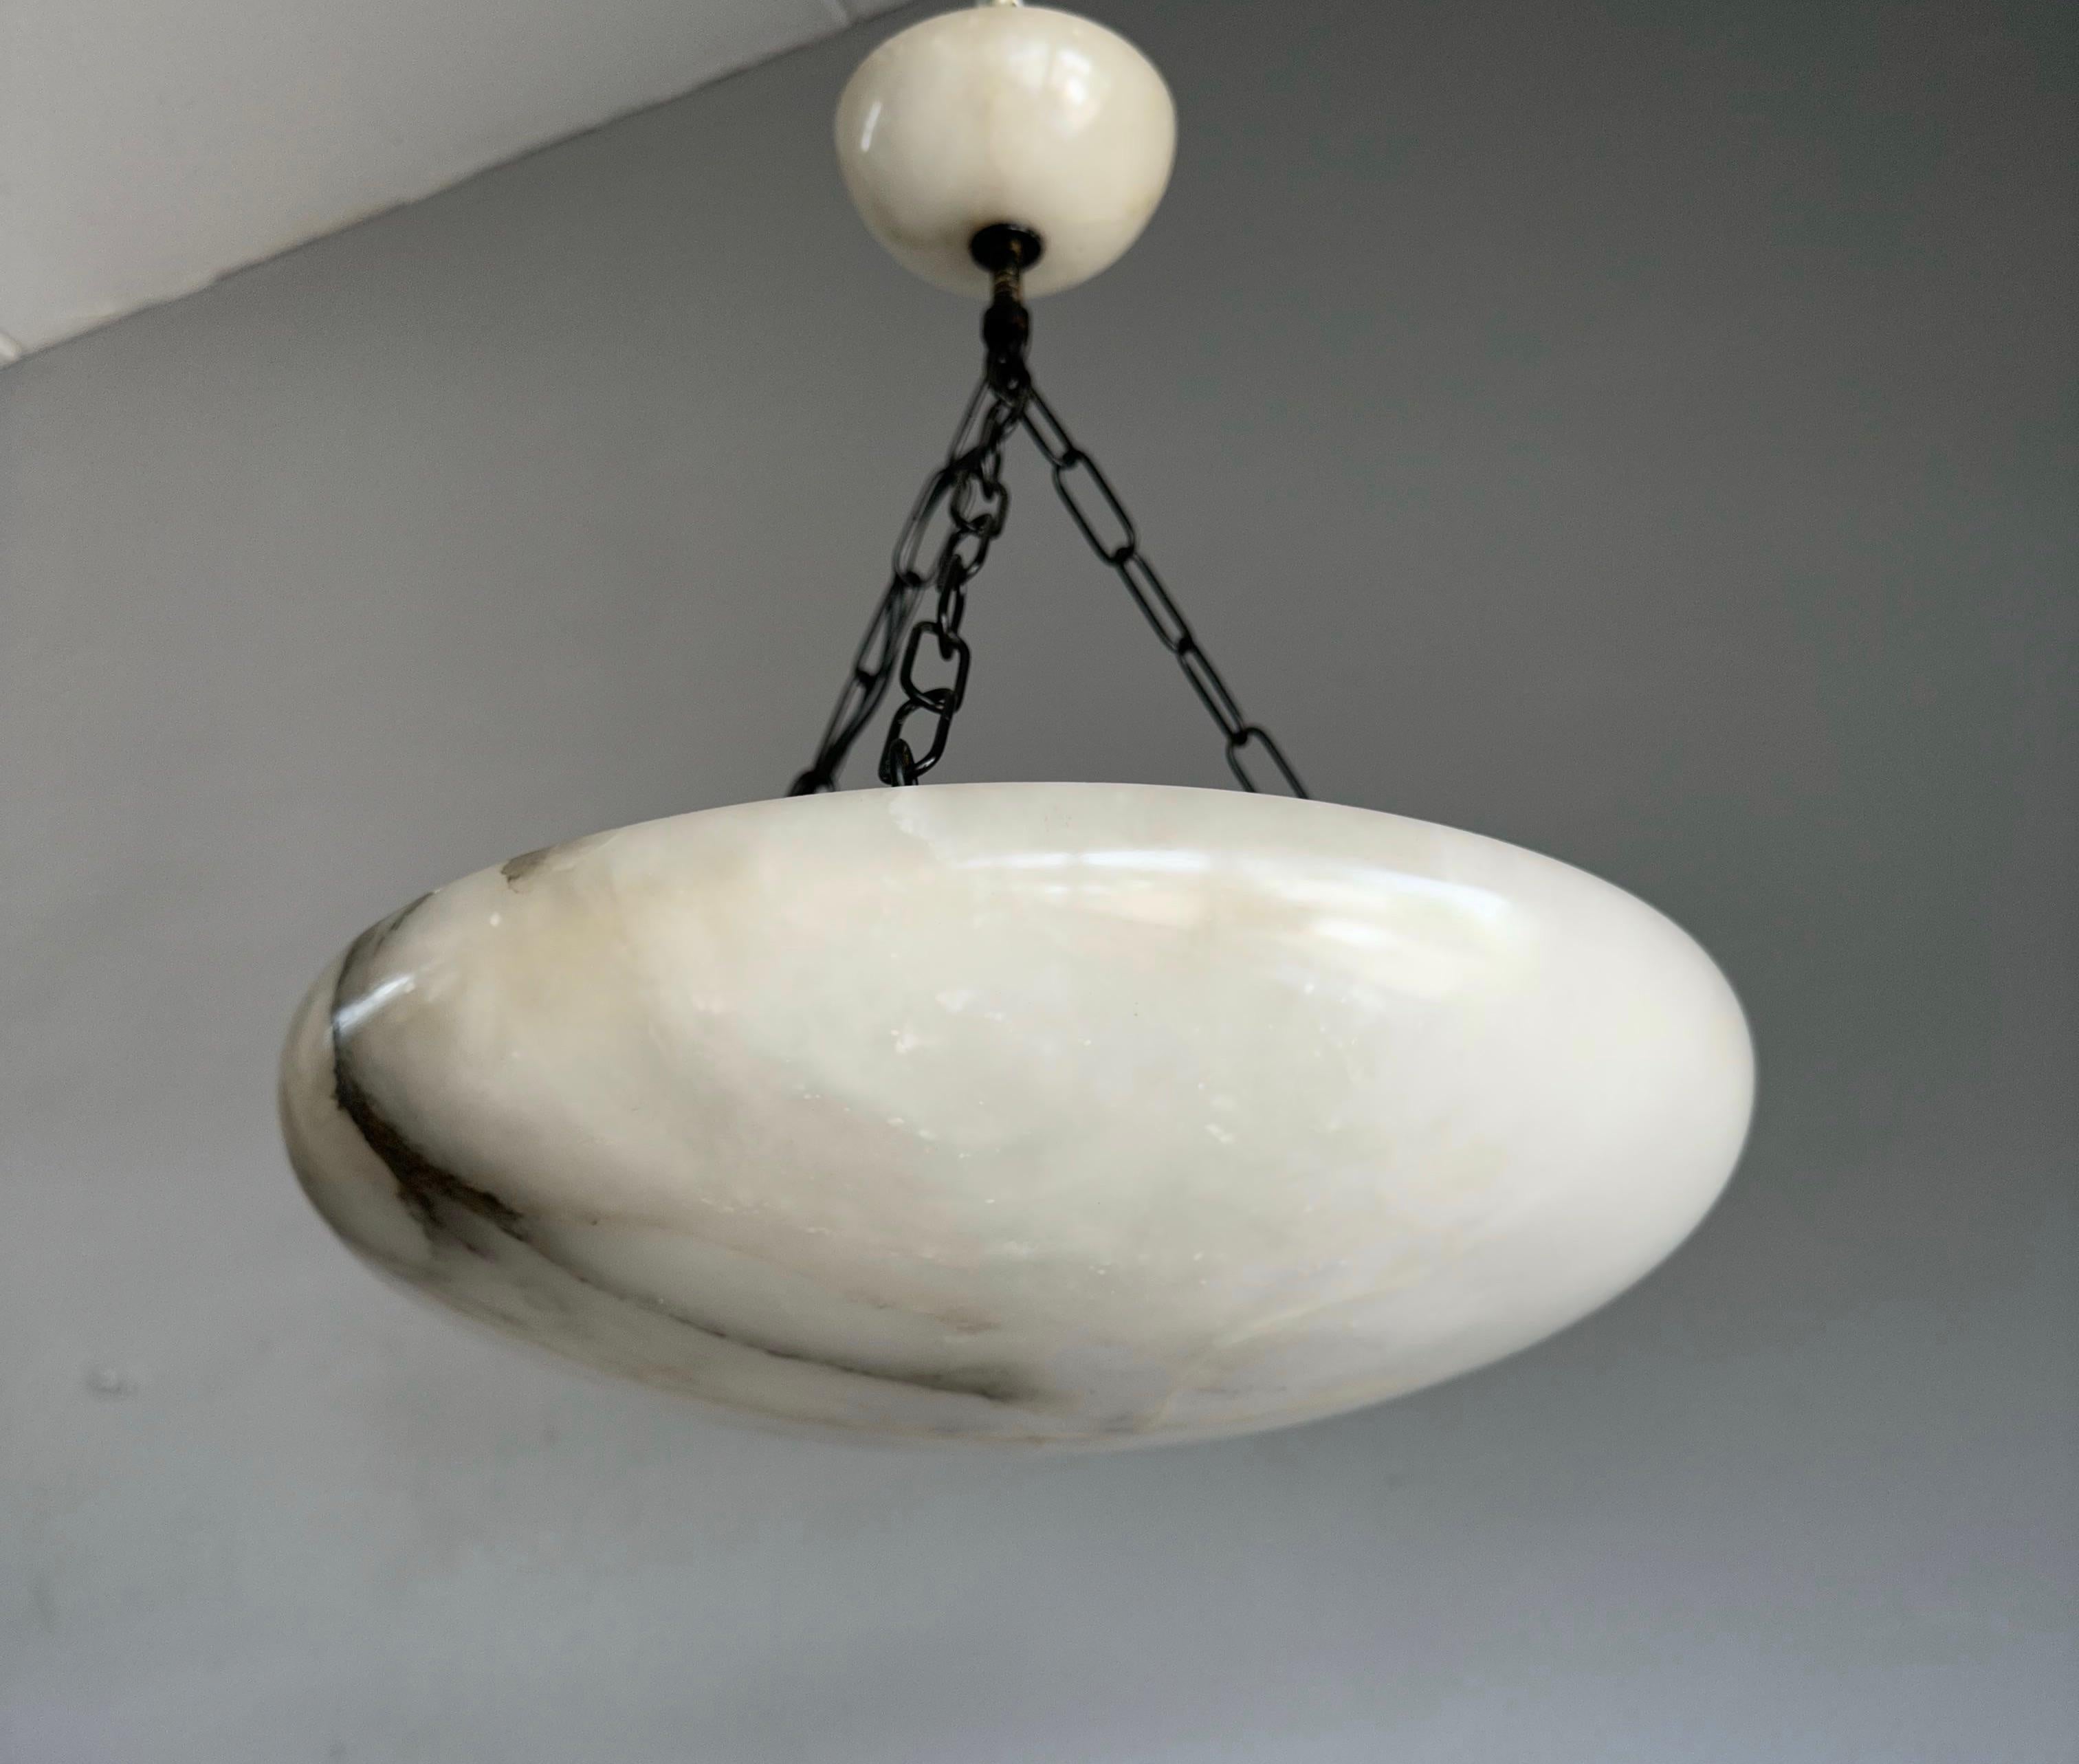 Great shape antique Art Deco ceiling lamp.

This wonderfully designed and truly beautiful light fixture has been very well looked after by its former owners. The rare size and the stylish flat design are very special, but the striking combination of